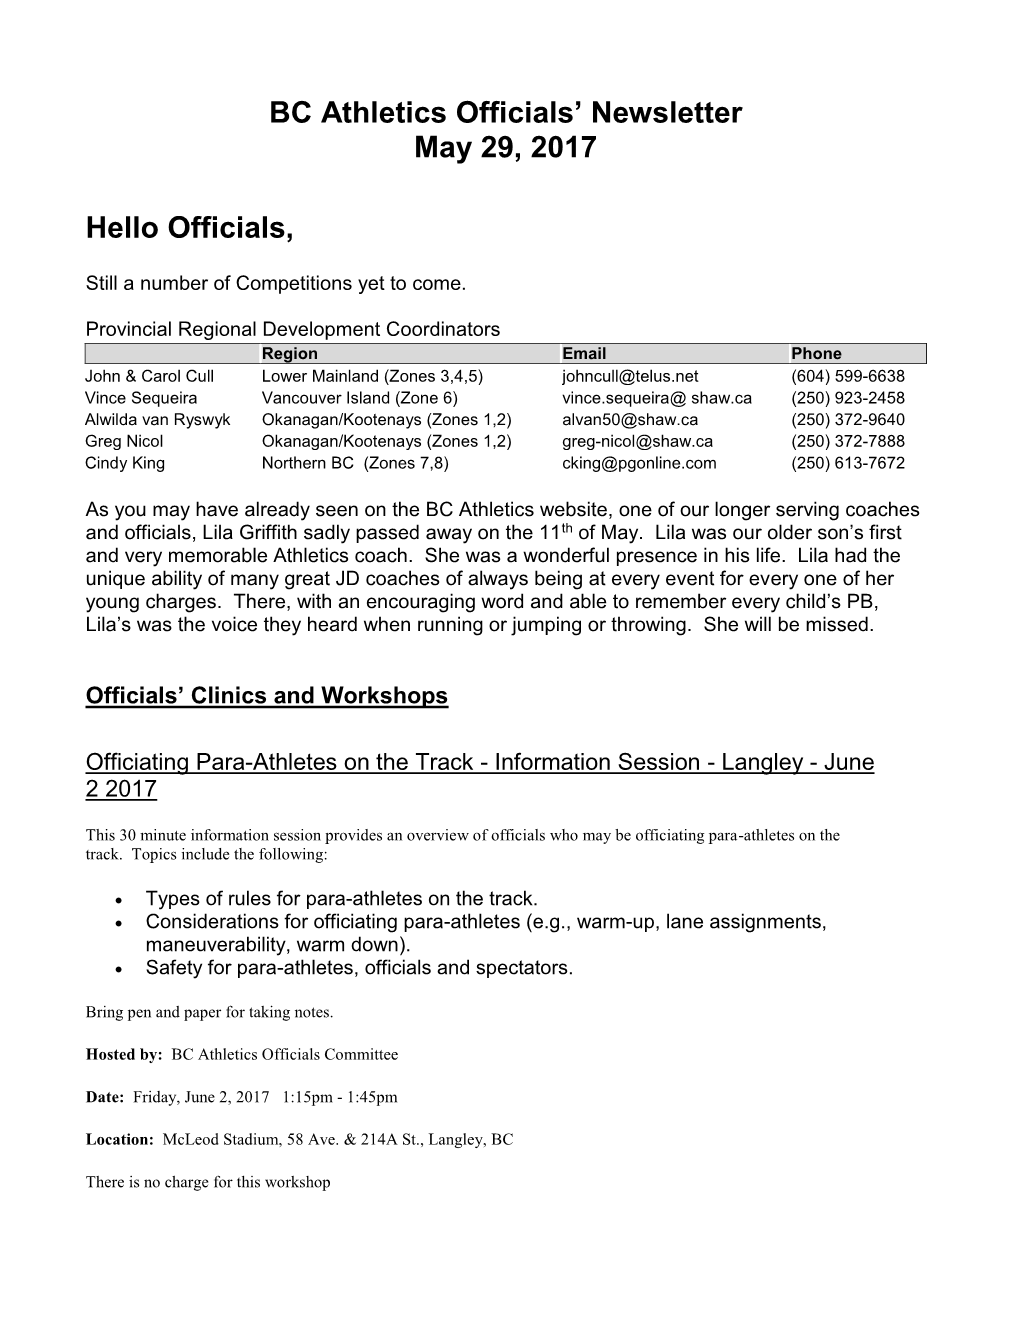 BC Athletics Officials' Newsletter May 29, 2017 Hello Officials